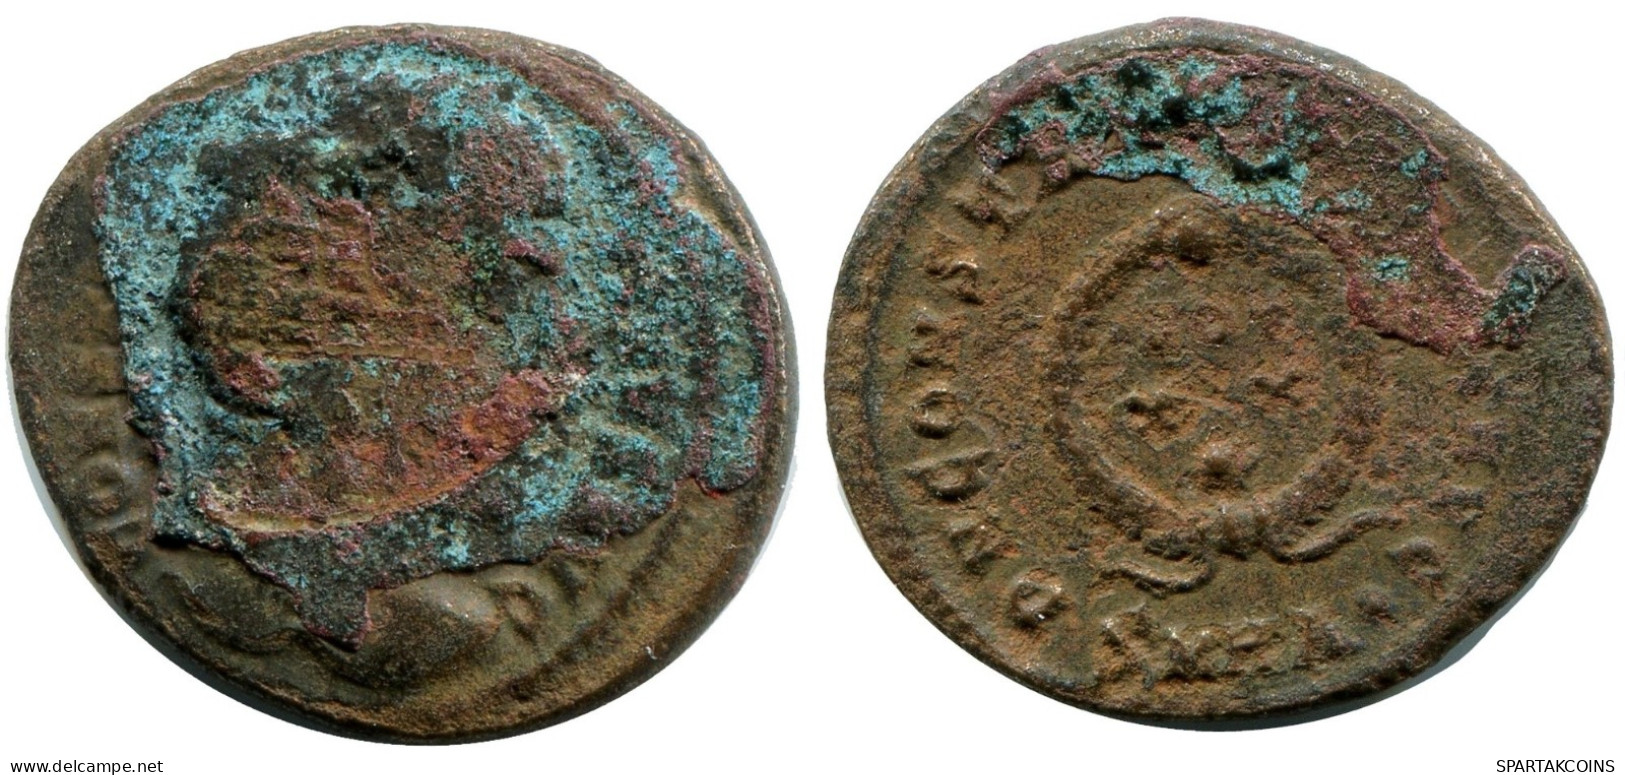 CONSTANTINE I MINTED IN HERACLEA FROM THE ROYAL ONTARIO MUSEUM #ANC11202.14.U.A - The Christian Empire (307 AD Tot 363 AD)